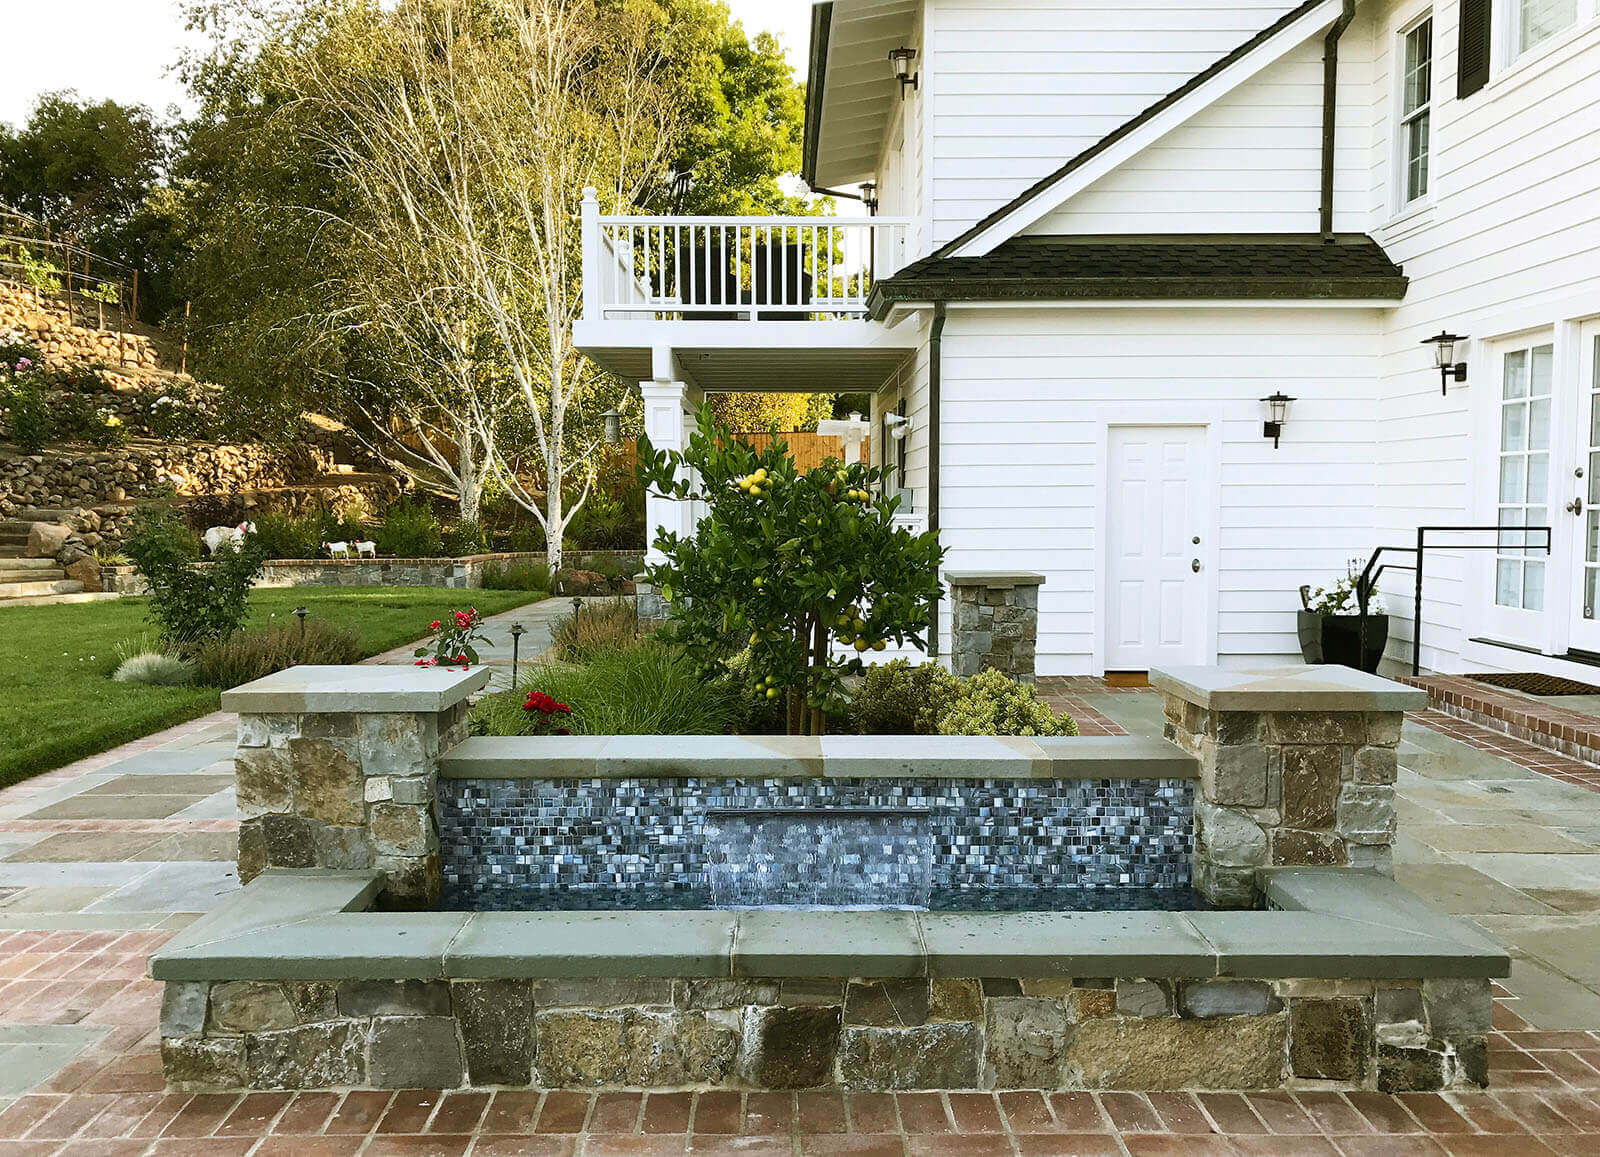 Small mosaic water fountain with wrapping stone-edged pool on stone and brick outdoor patio